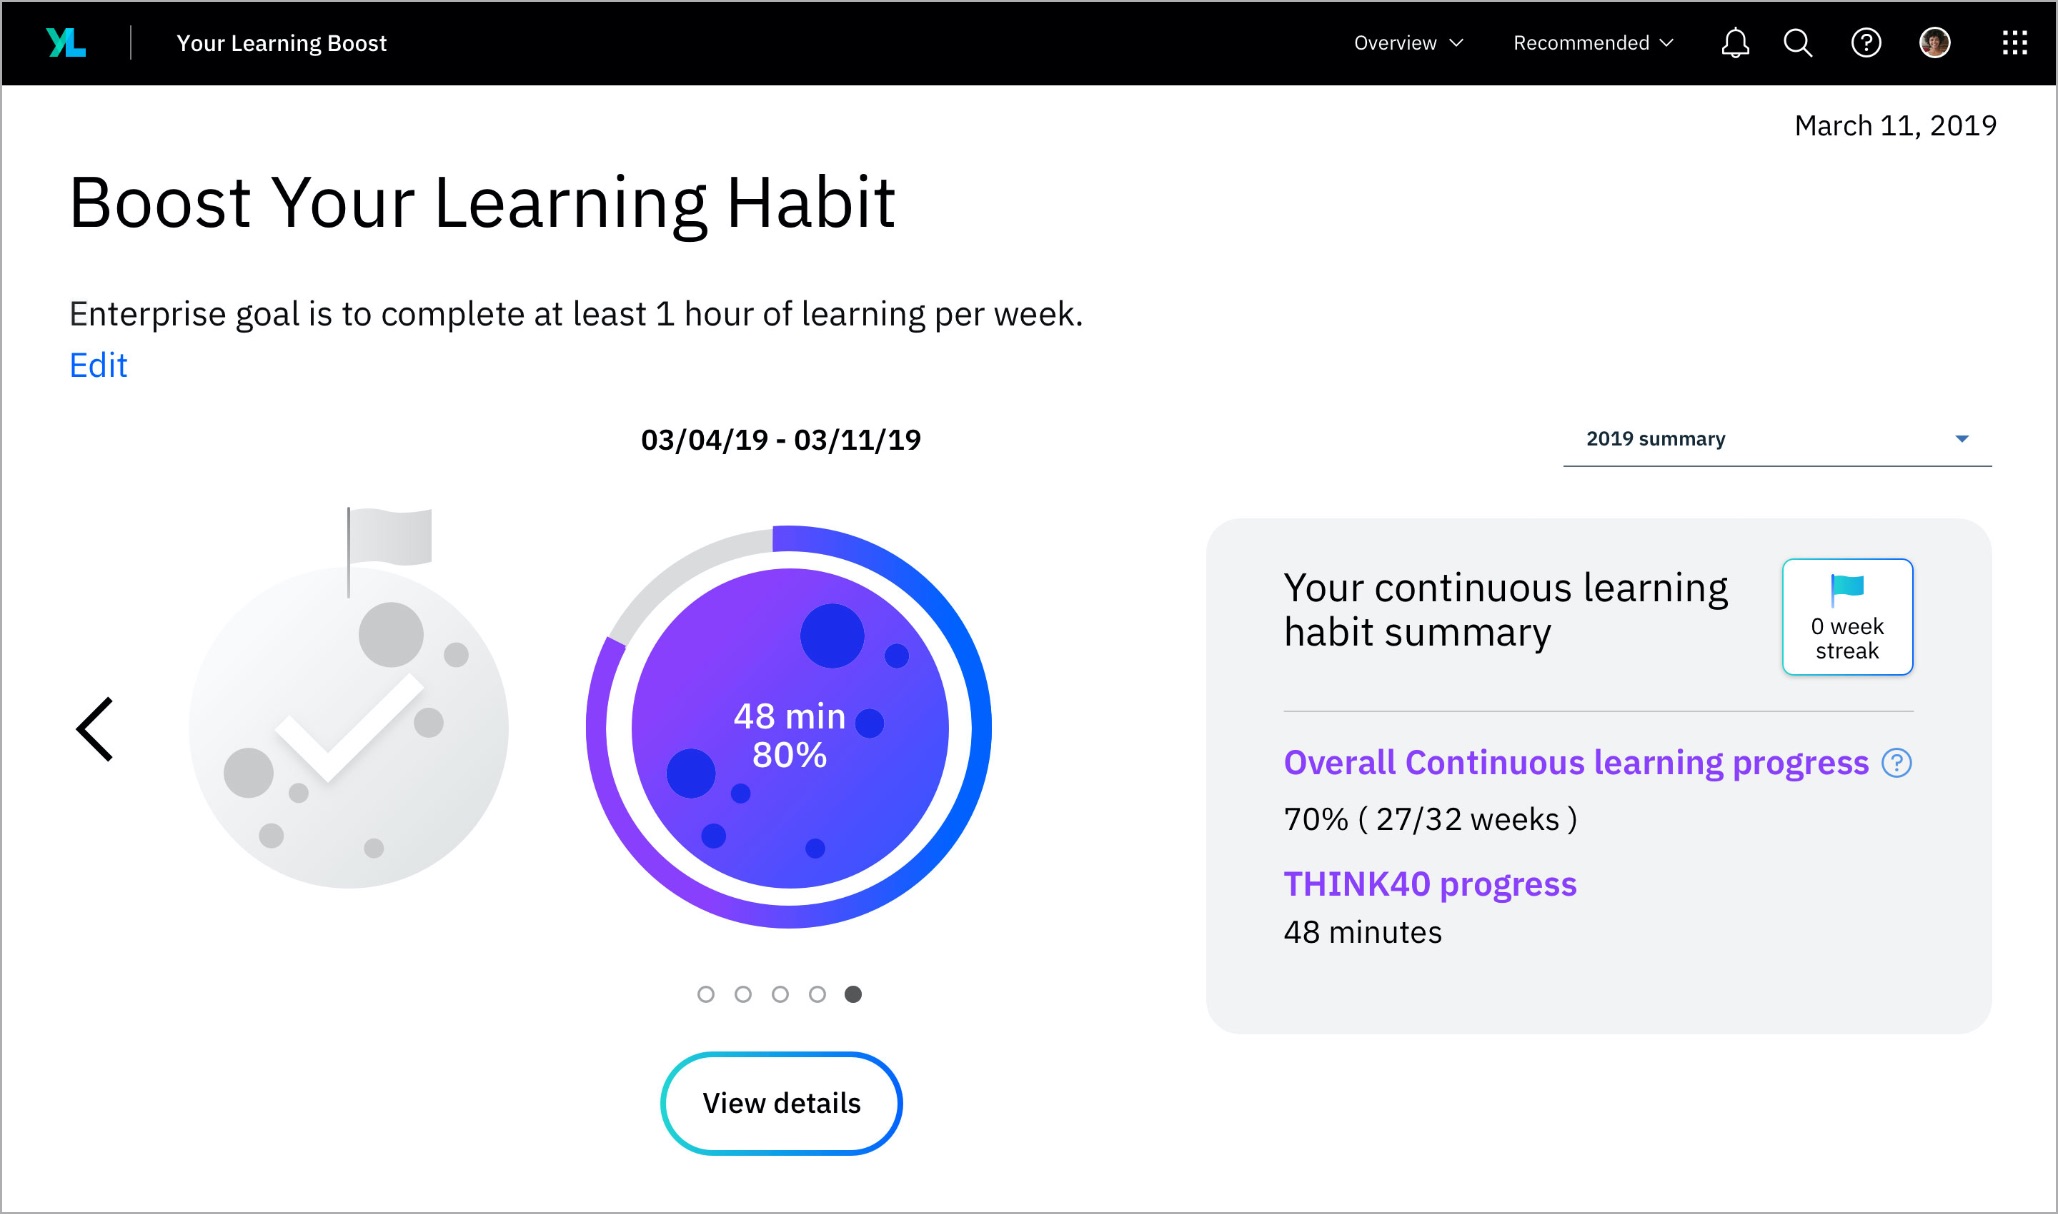 REDspace develops custom learning initiatives to train employees all over the world